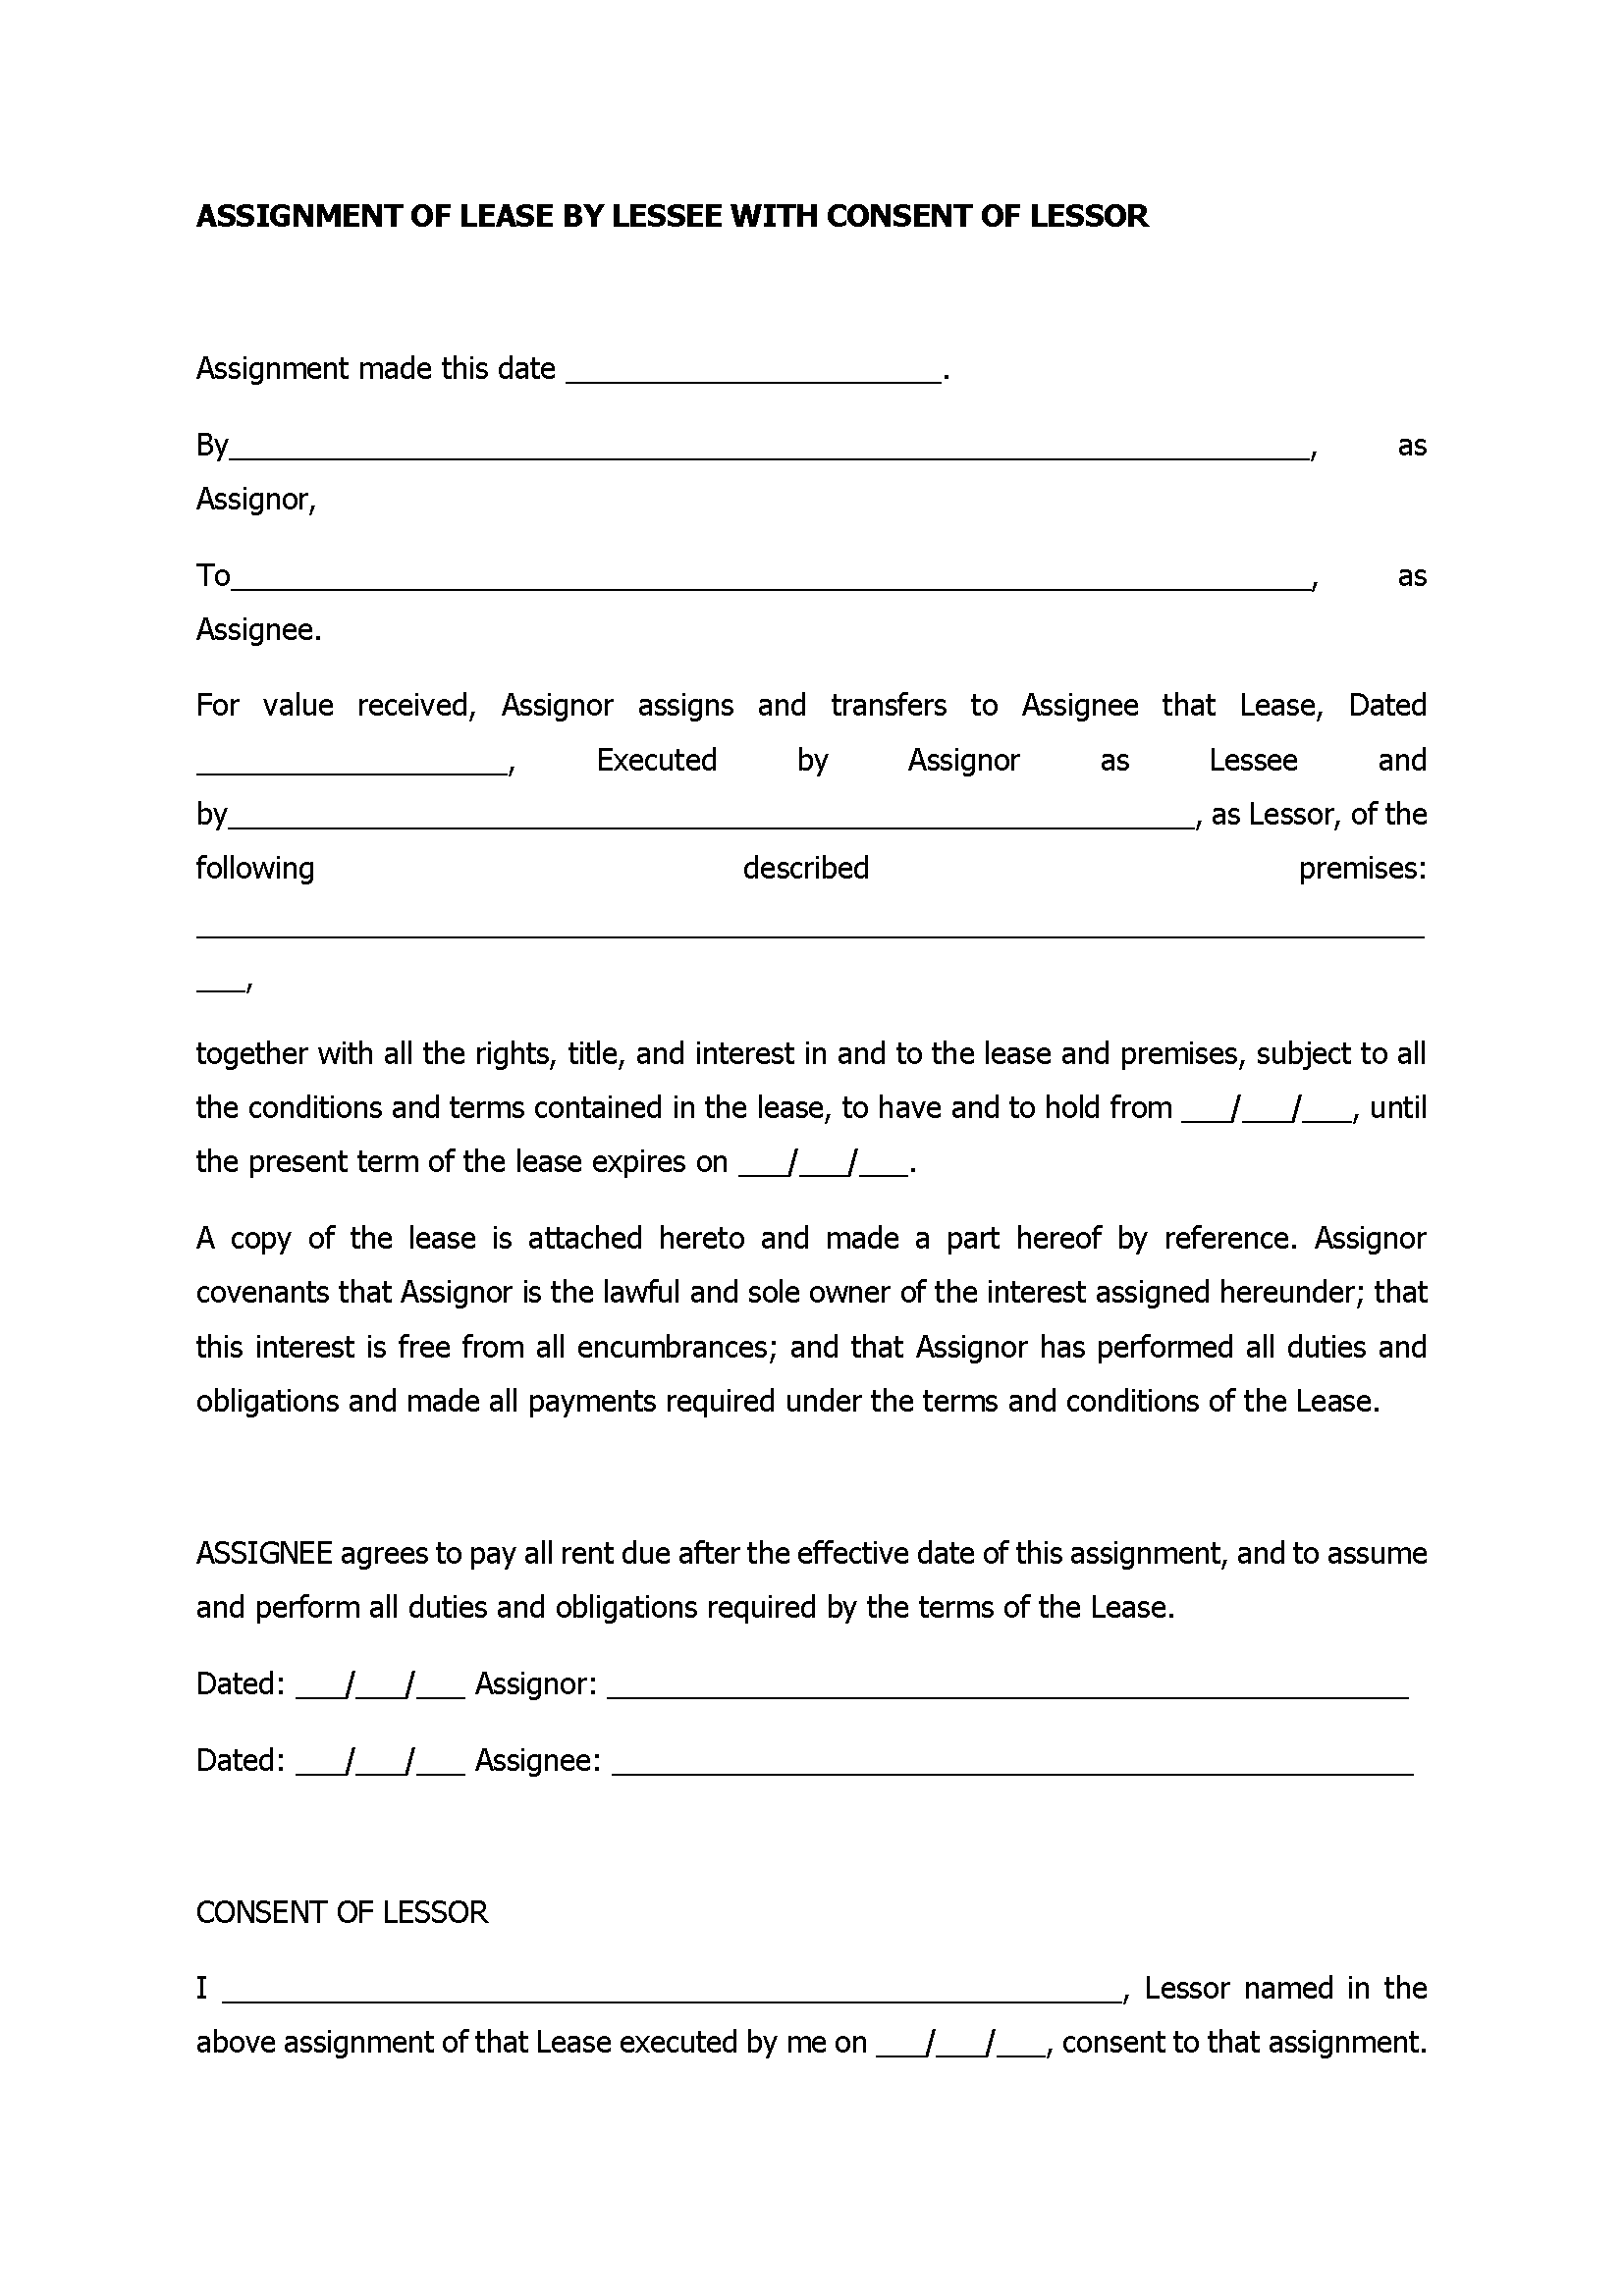 Assignment Of Lease By Lessee With Consent Of Lessor